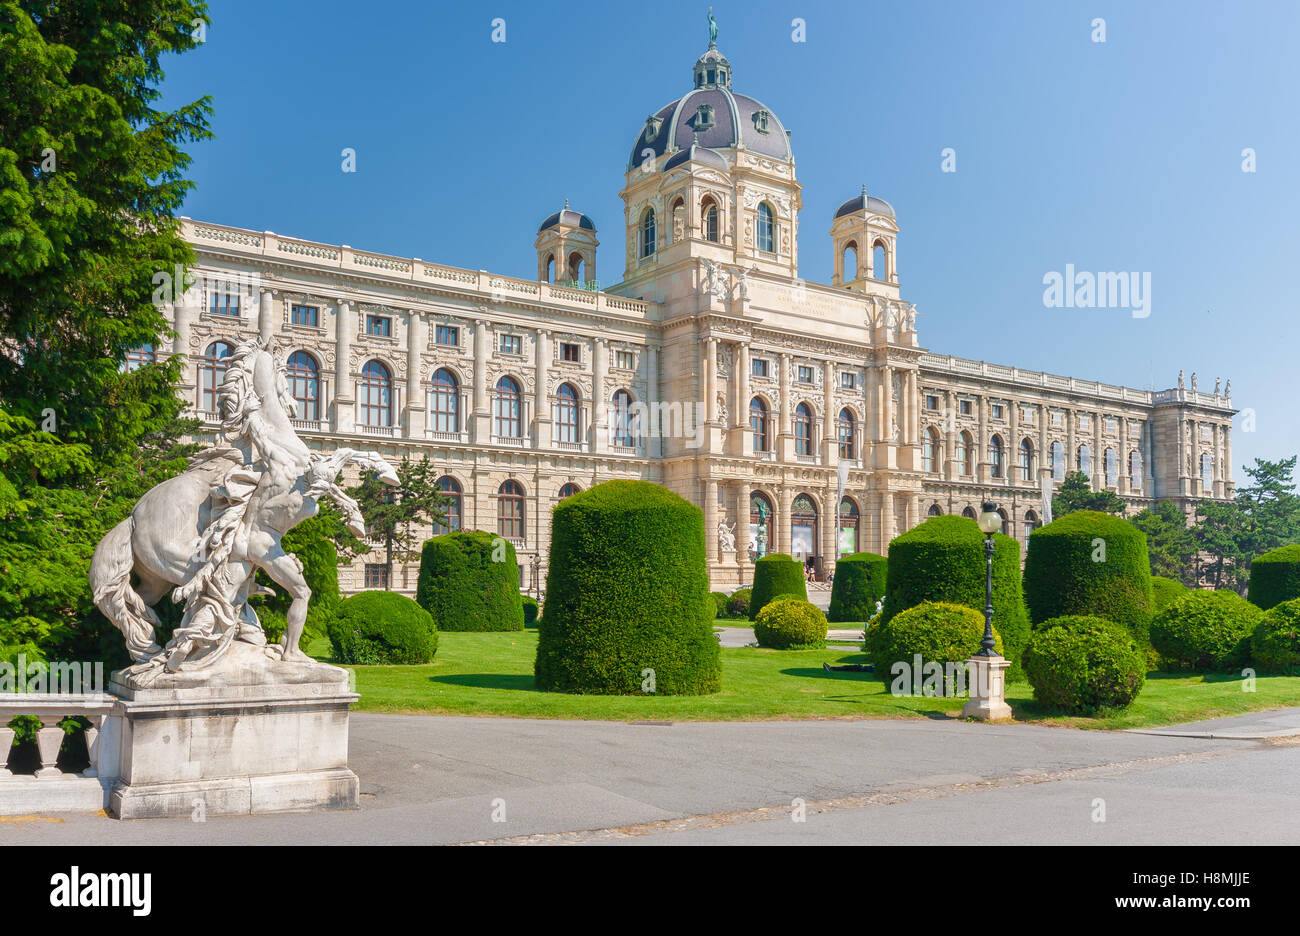 Classic view of famous Naturhistorisches Museum (Natural History Museum) with park and sculpture in Vienna, Austria Stock Photo